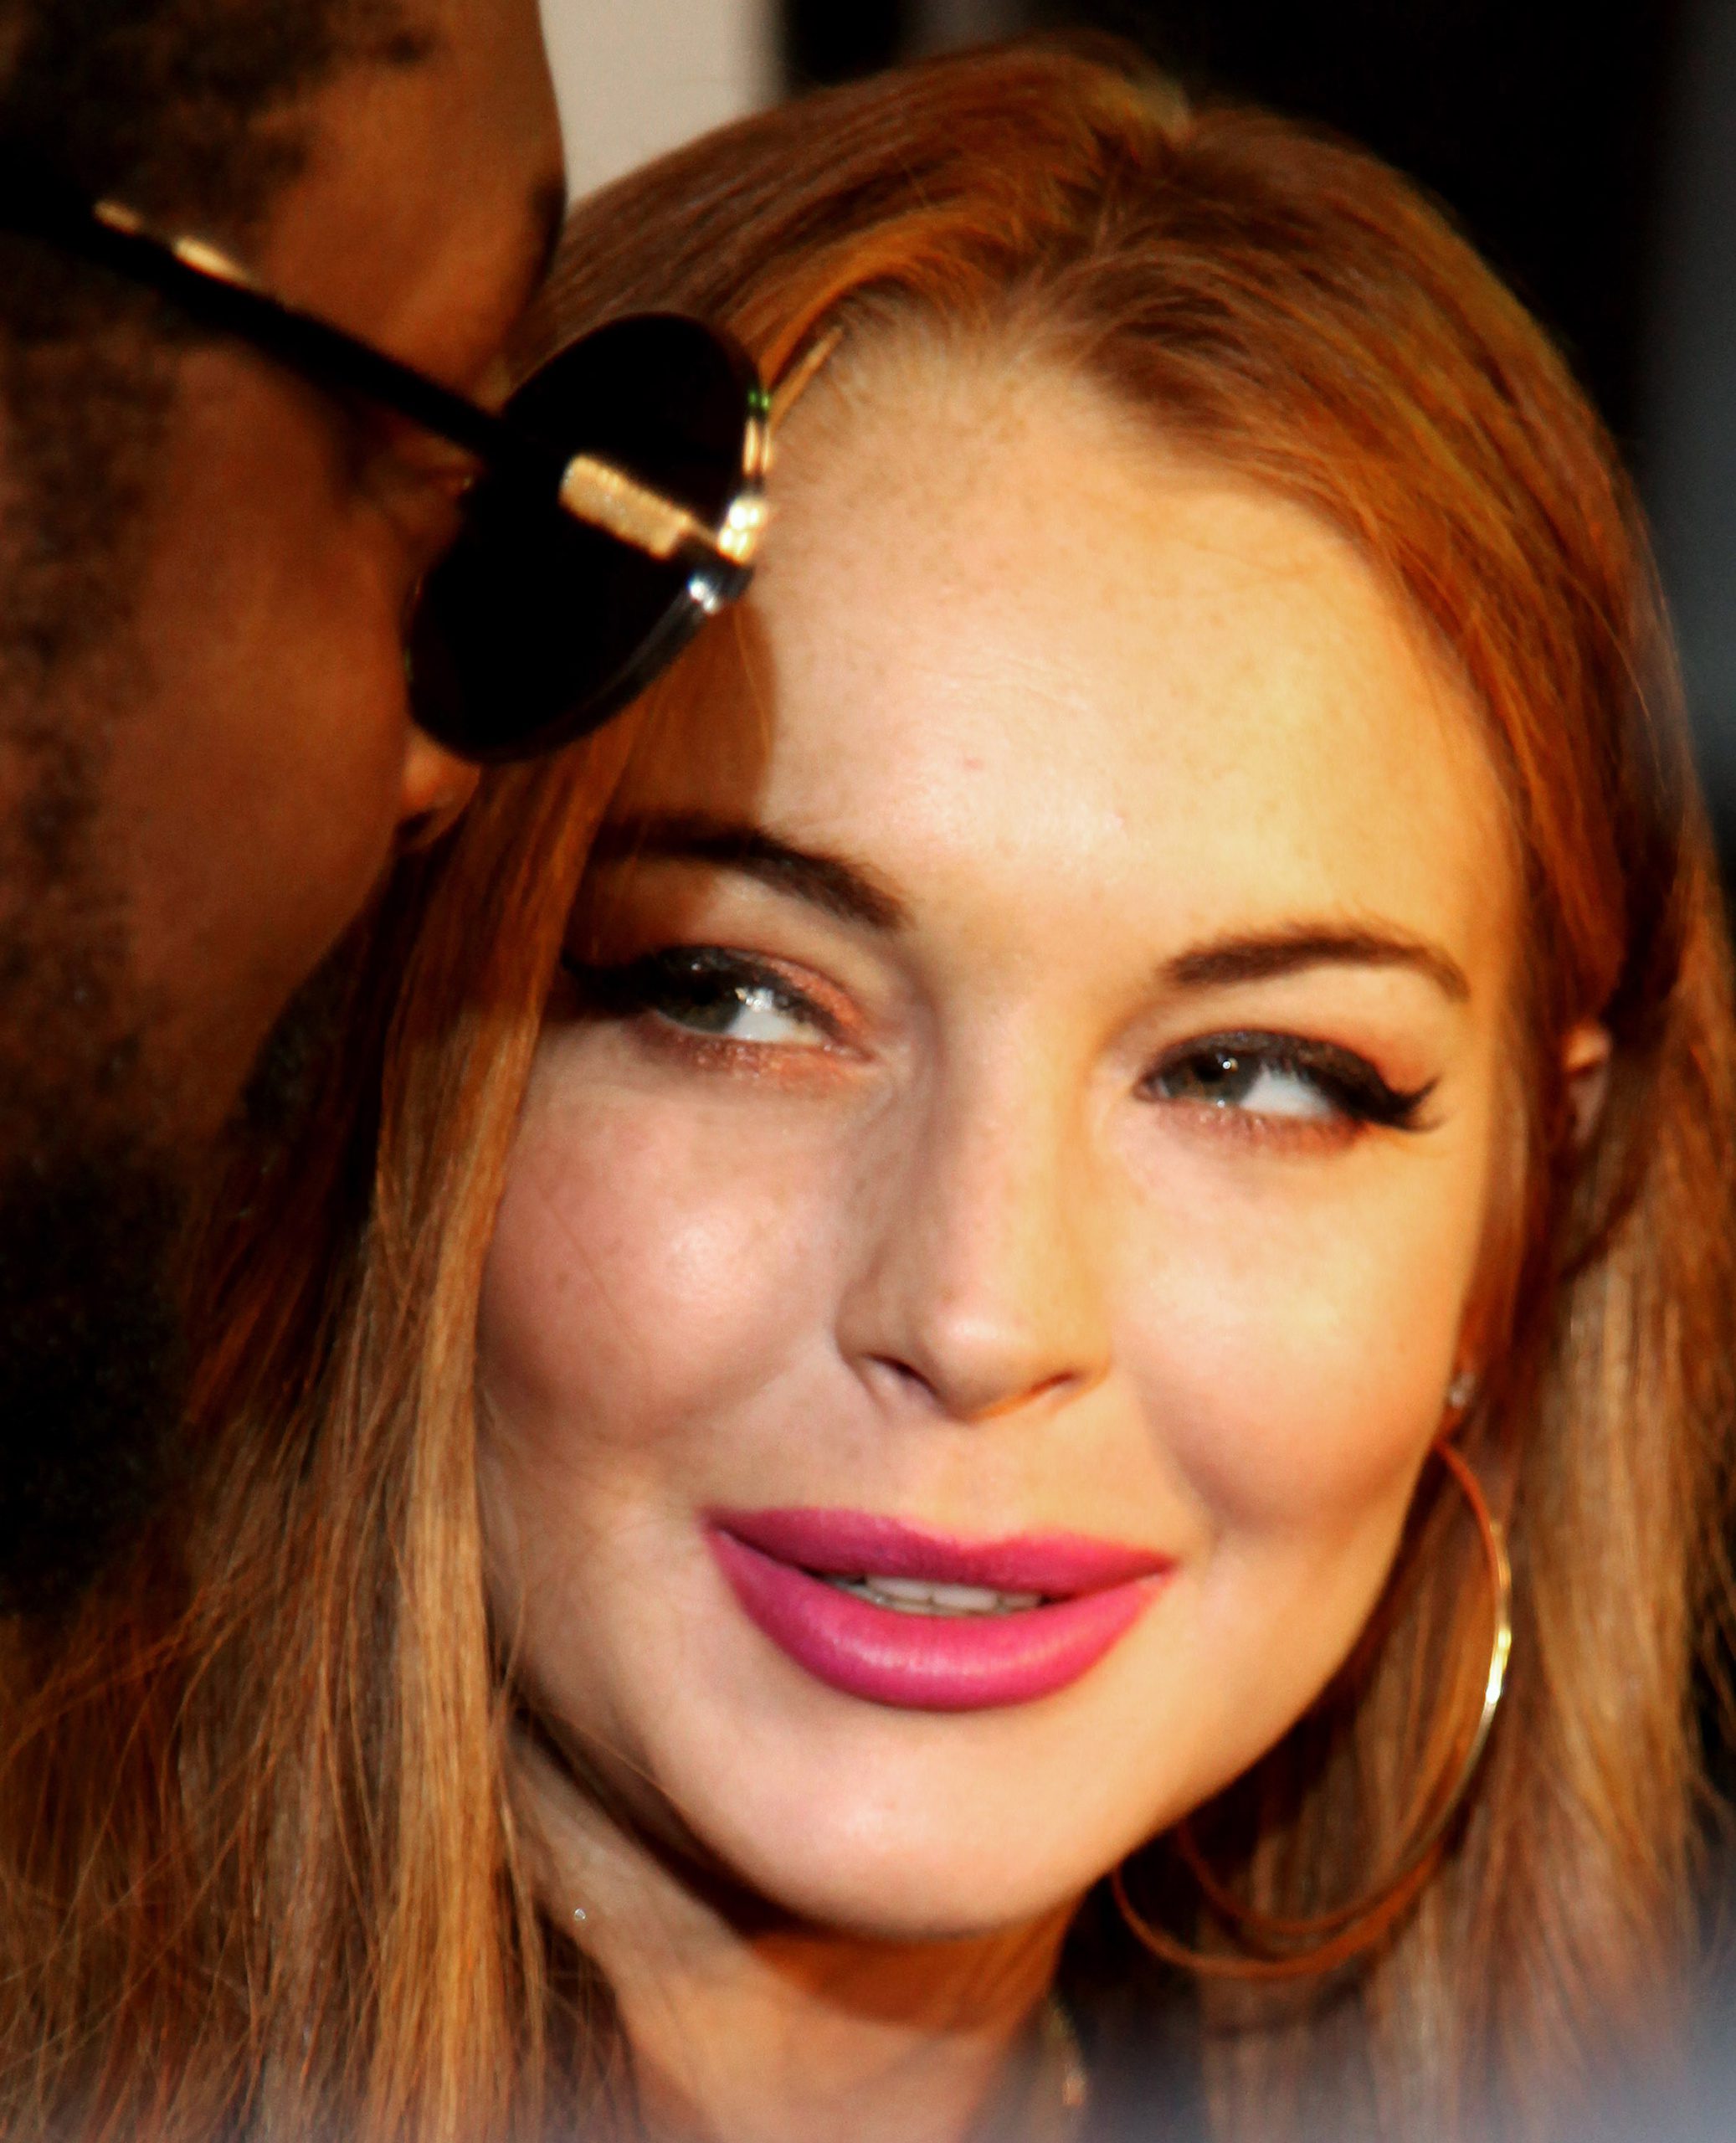 Lindsay Lohan - 20 Celebrities with Criminal Records